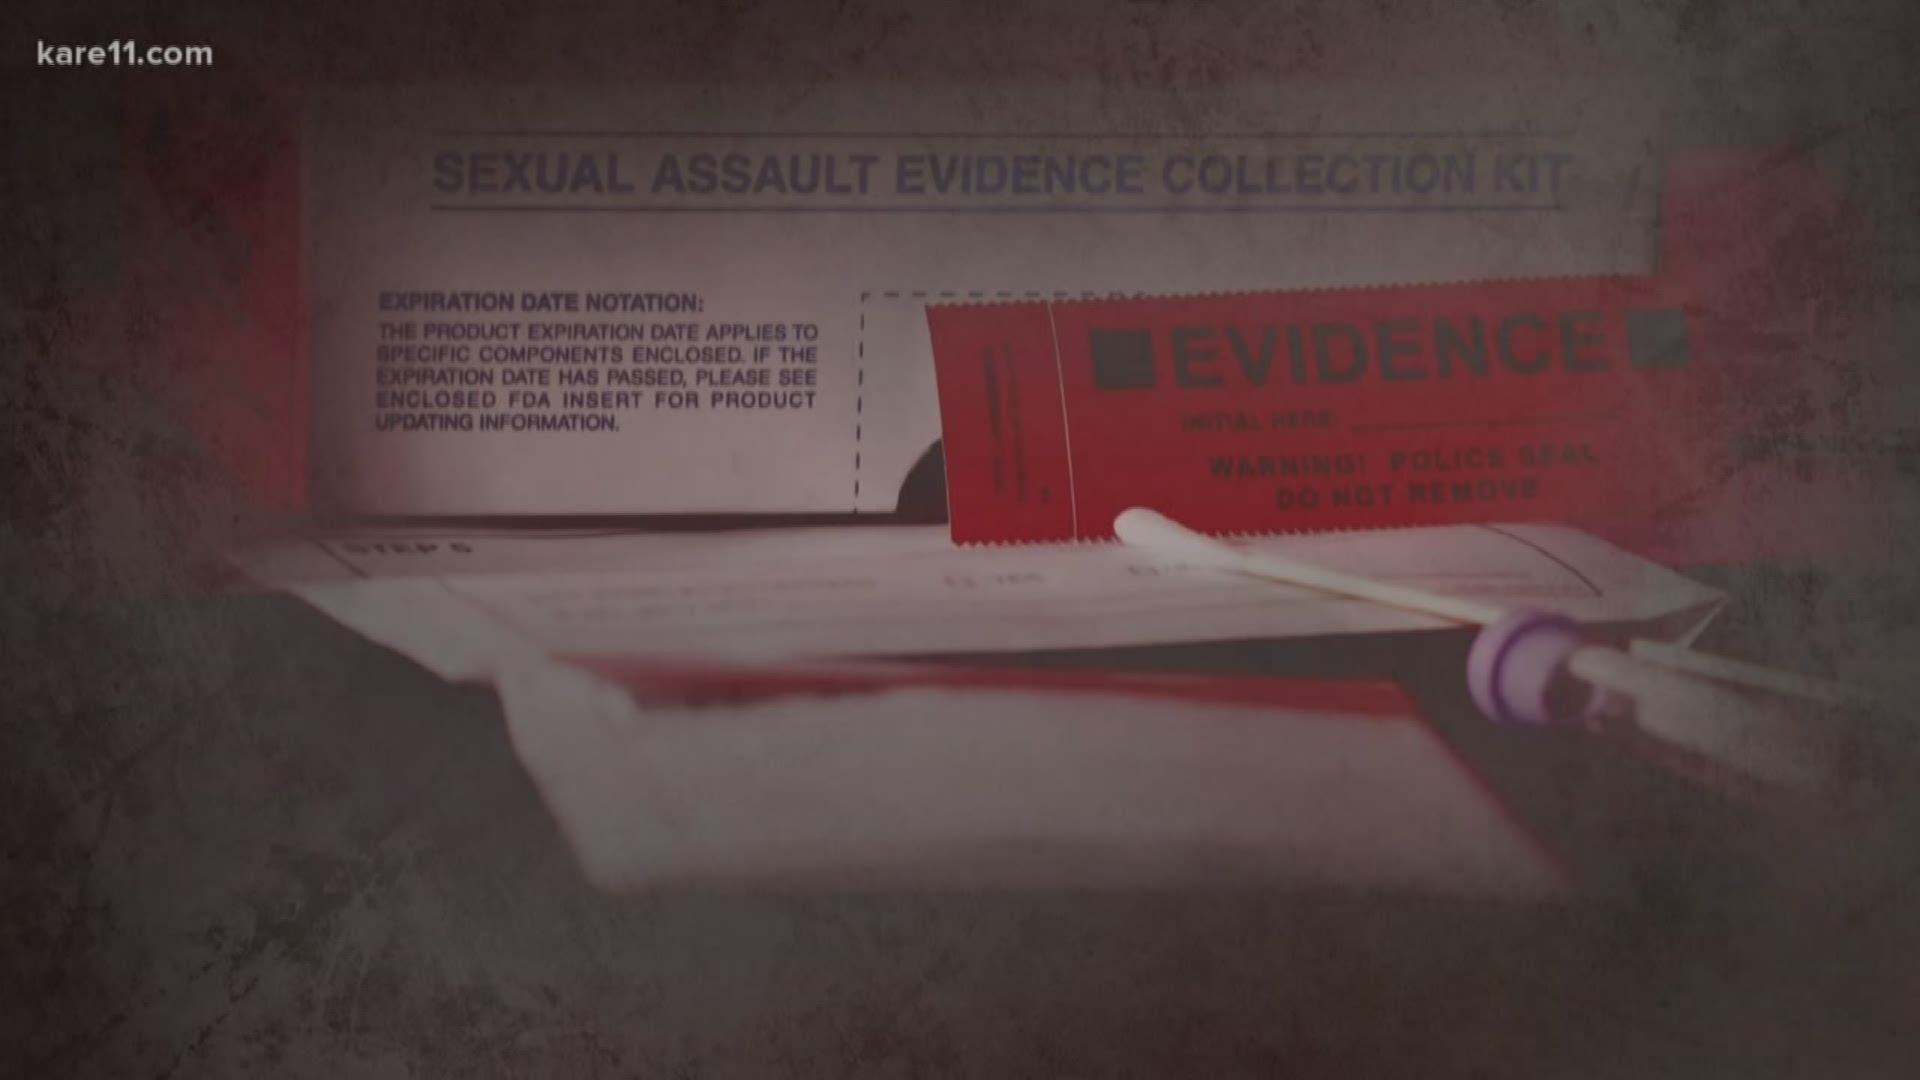 Destroying rape kits in unsolved cases violates U. S. Department of Justice guidelines – and may be allowing serial rapists to go free.